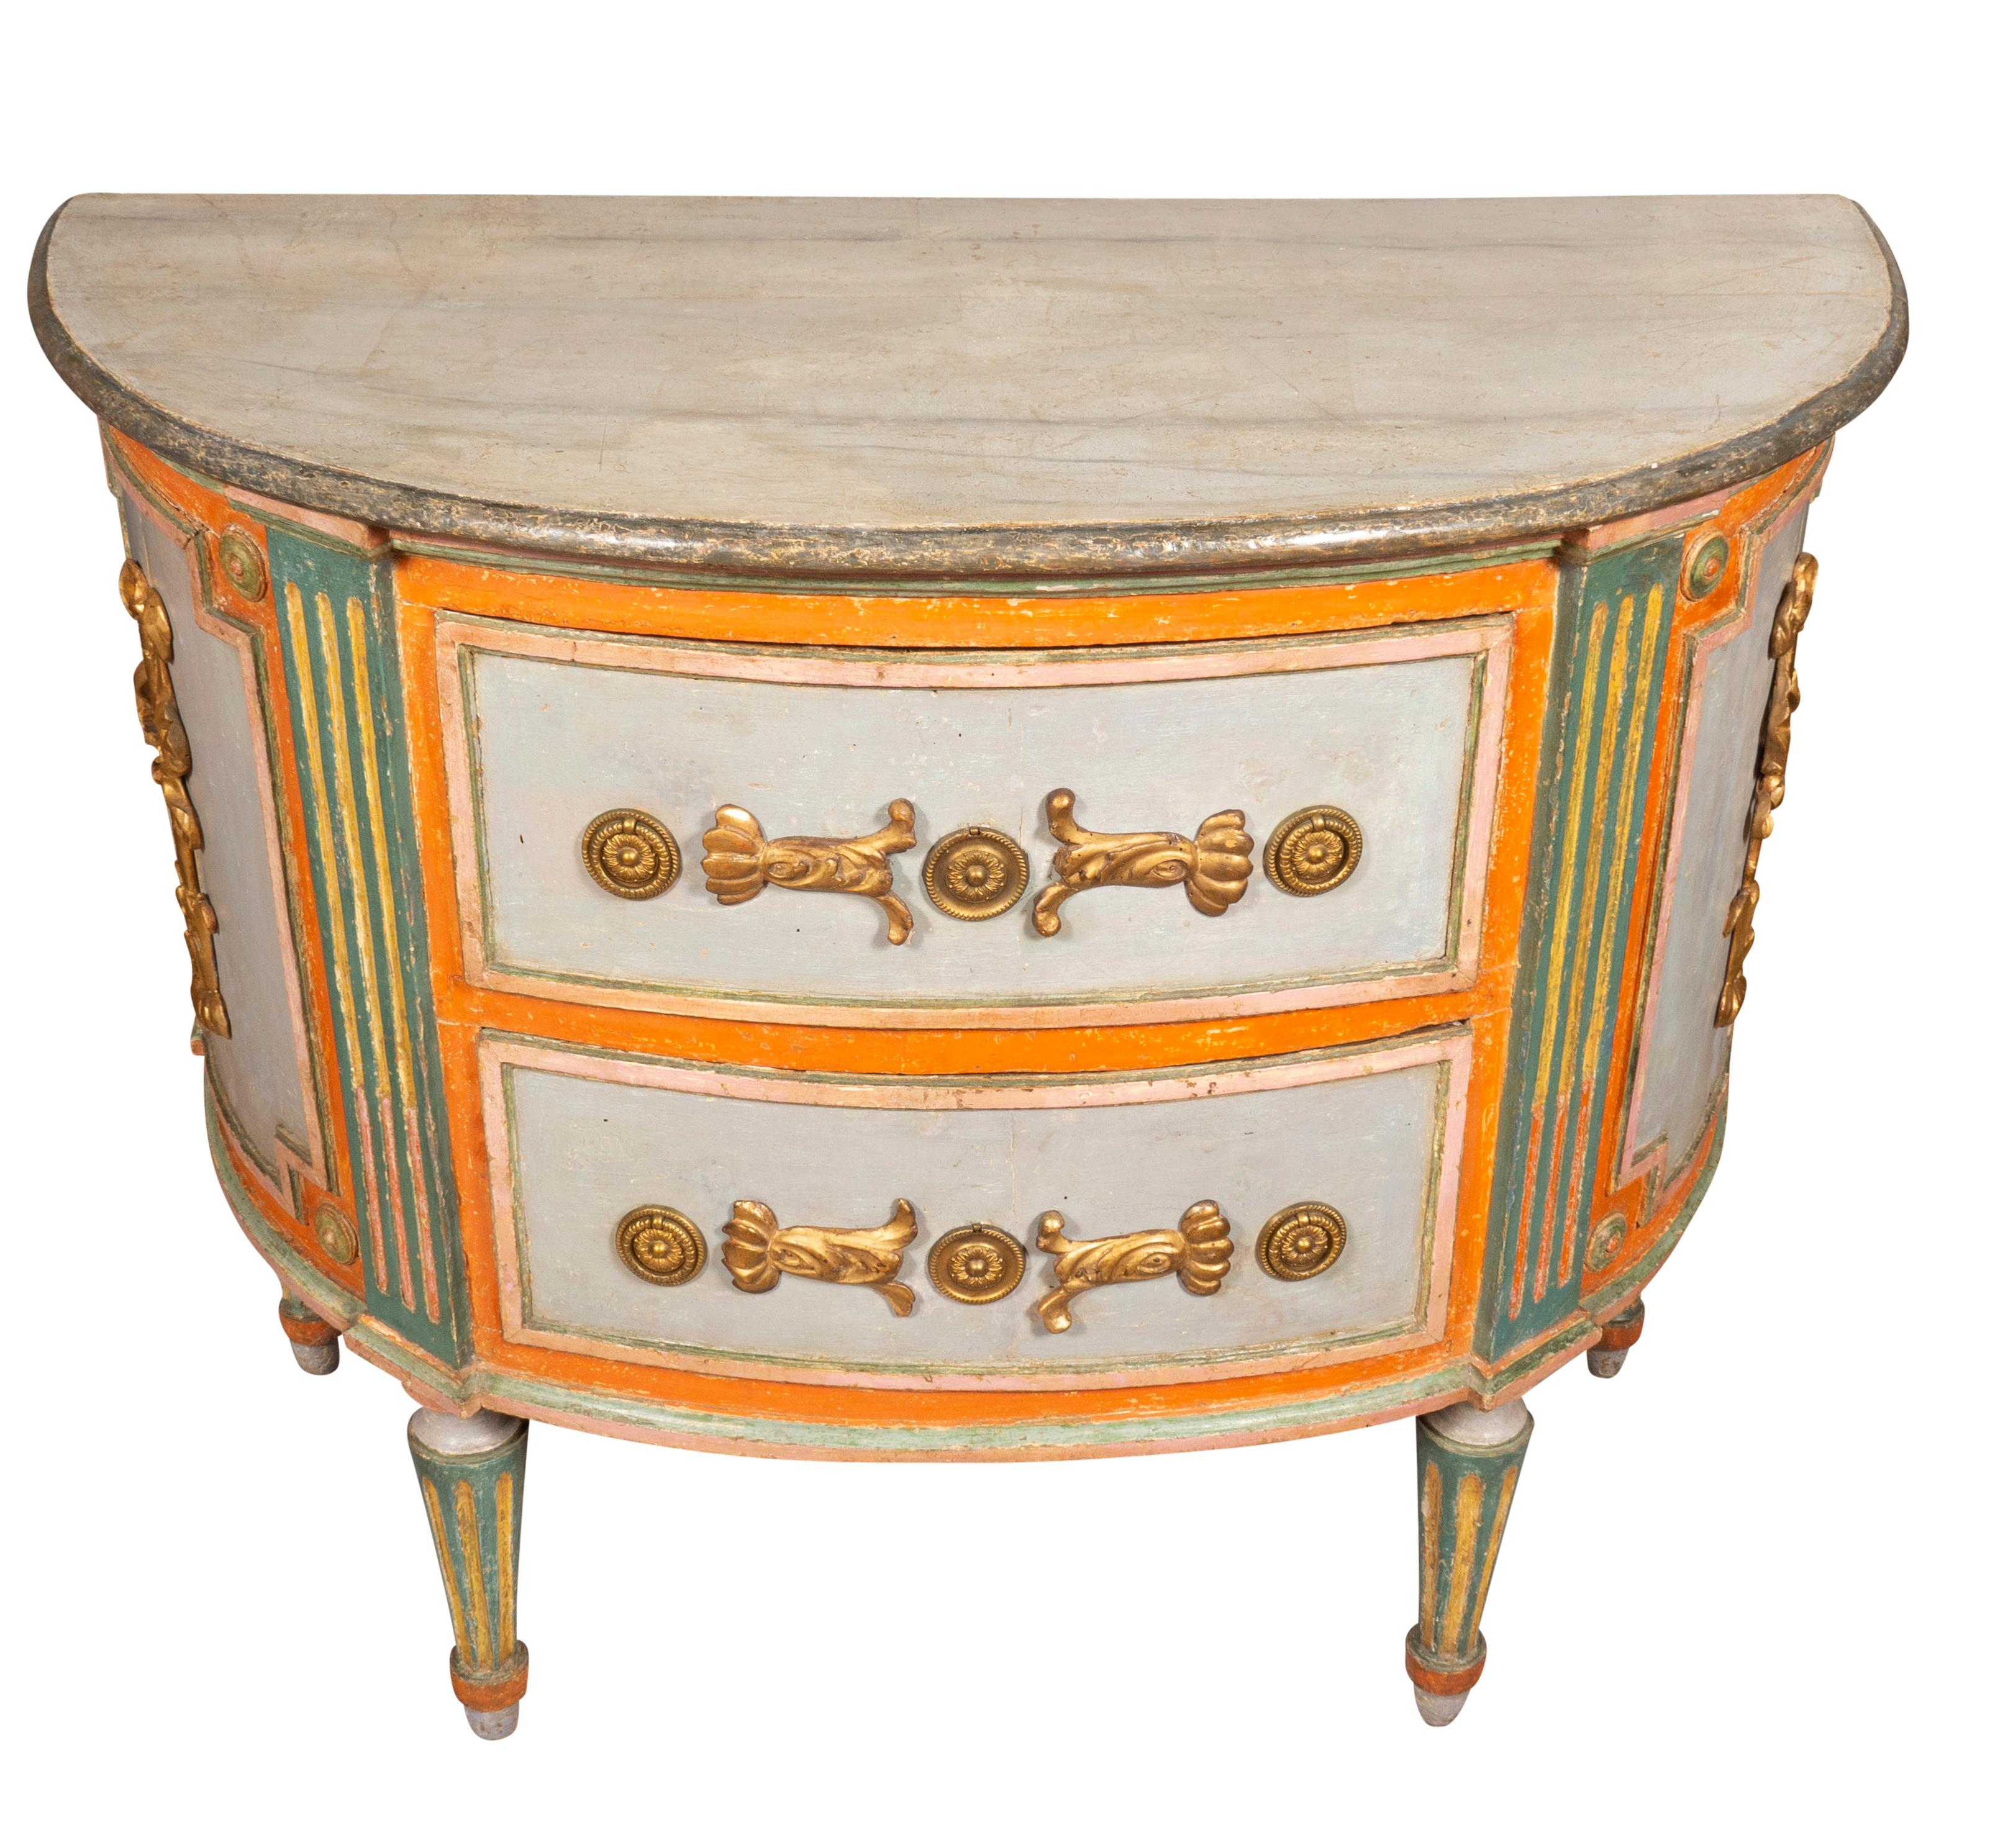 Neoclassical Italian Neoclassic Painted Commode For Sale